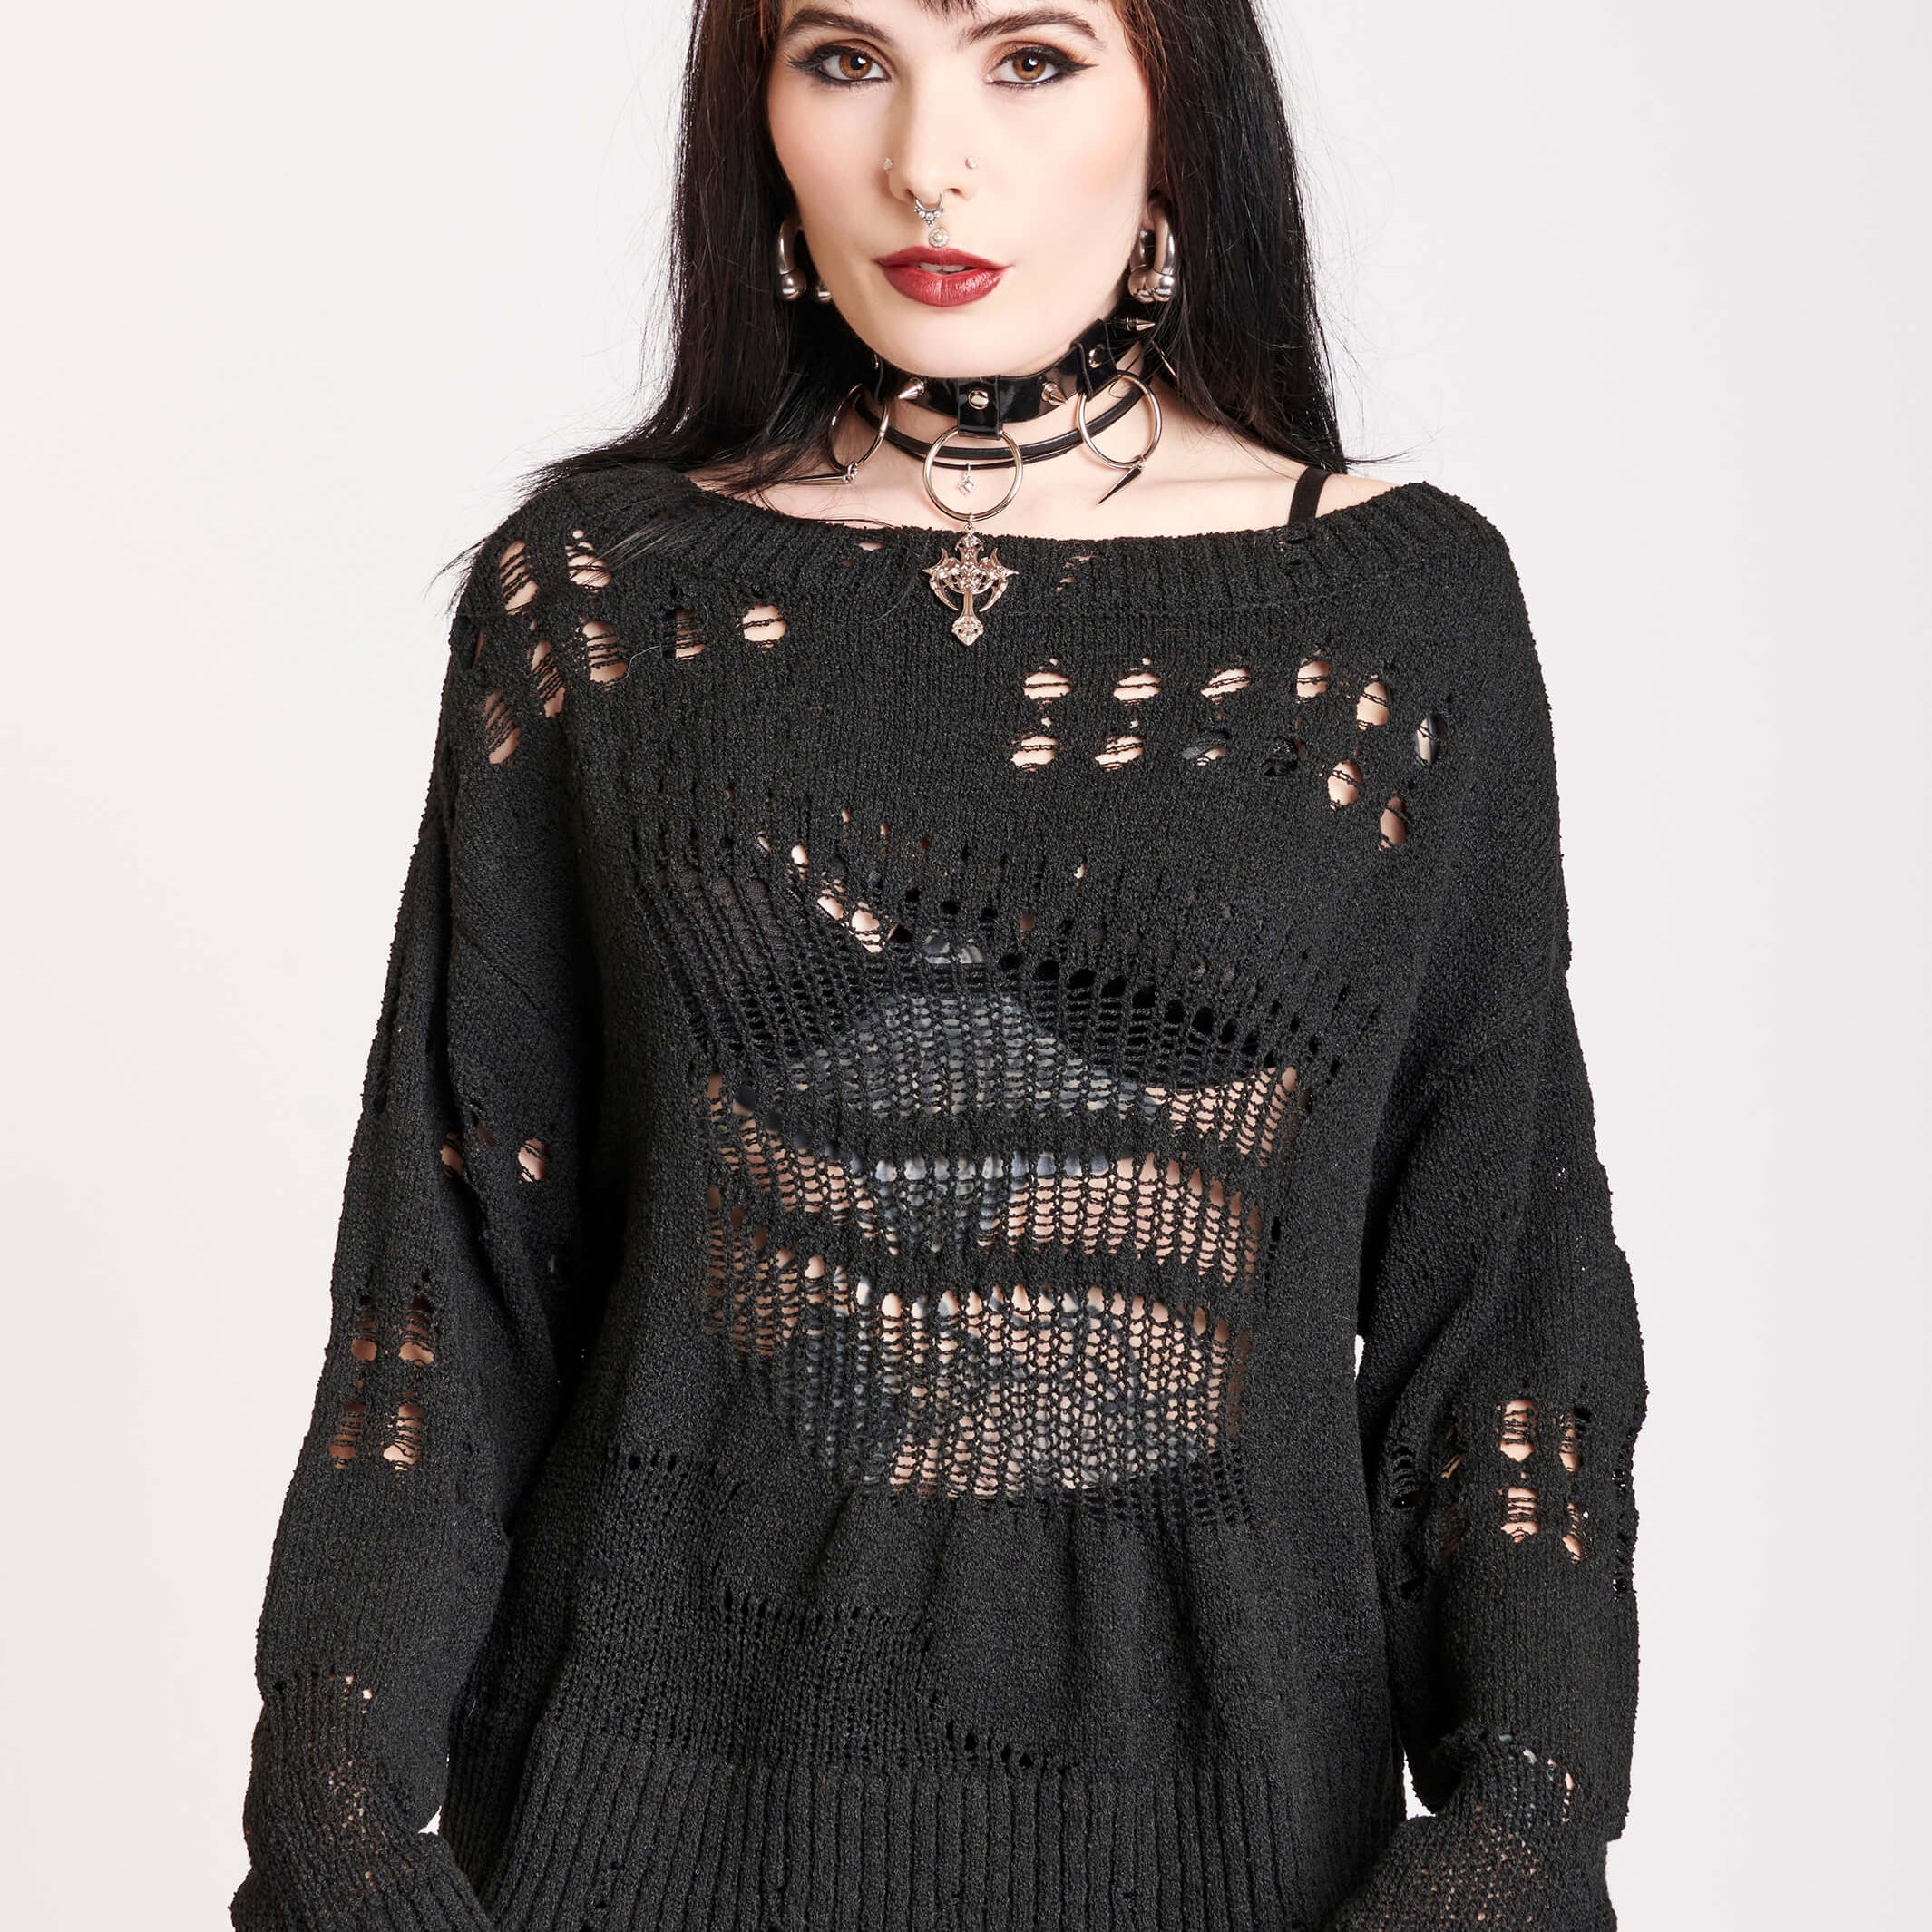 Black Sweater with drop stitch details